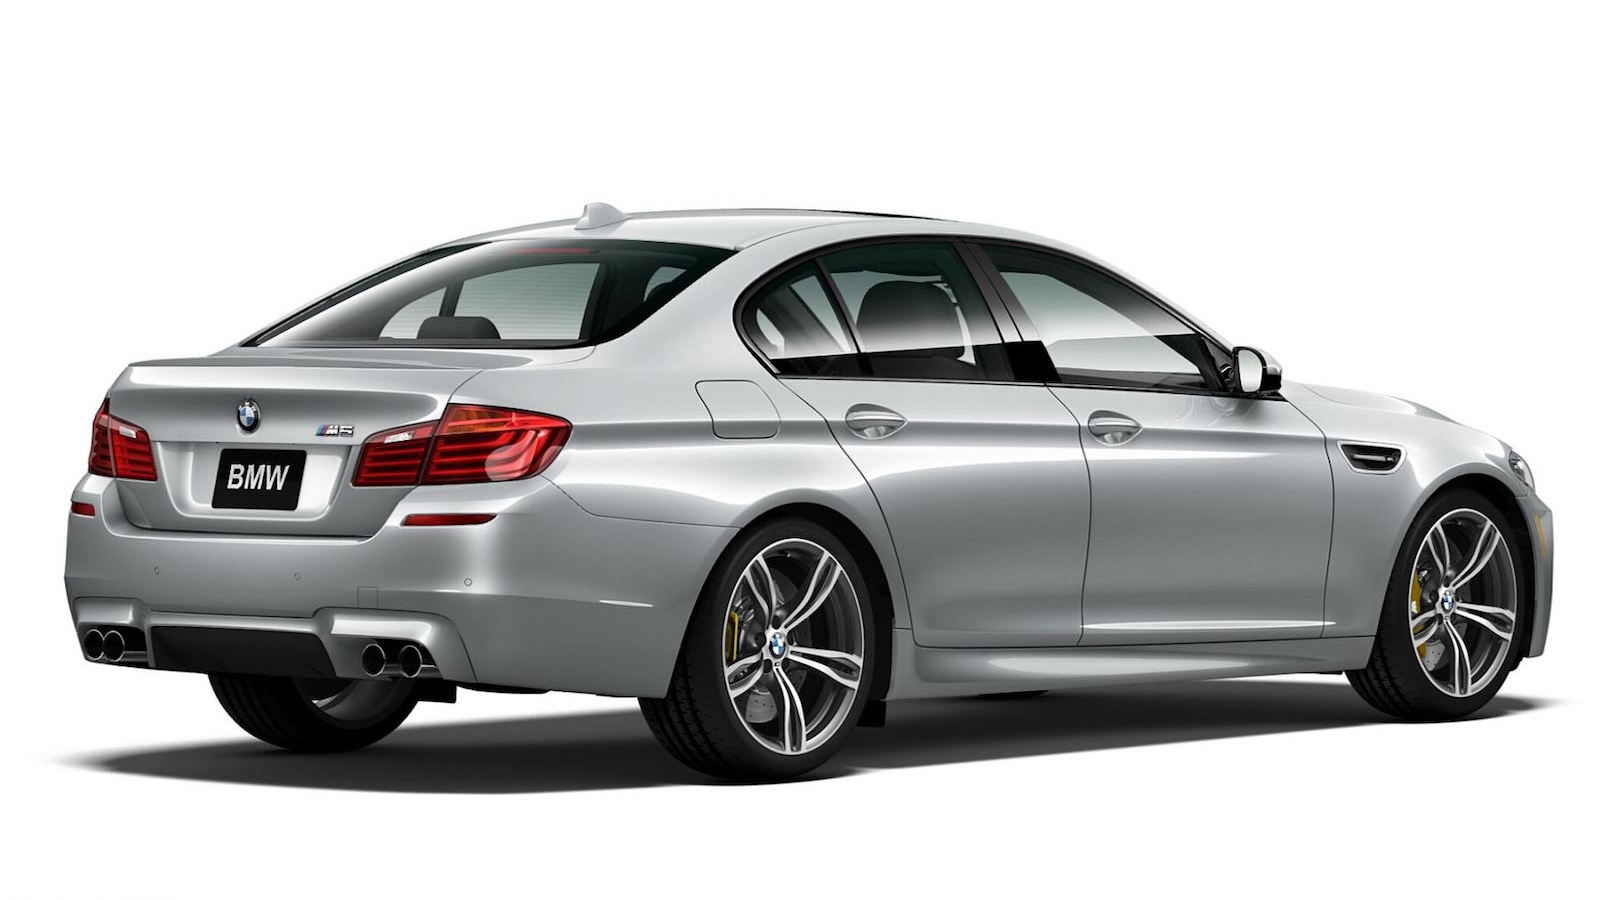 2016 BMW M5 Pure Metal Silver Limited Edition